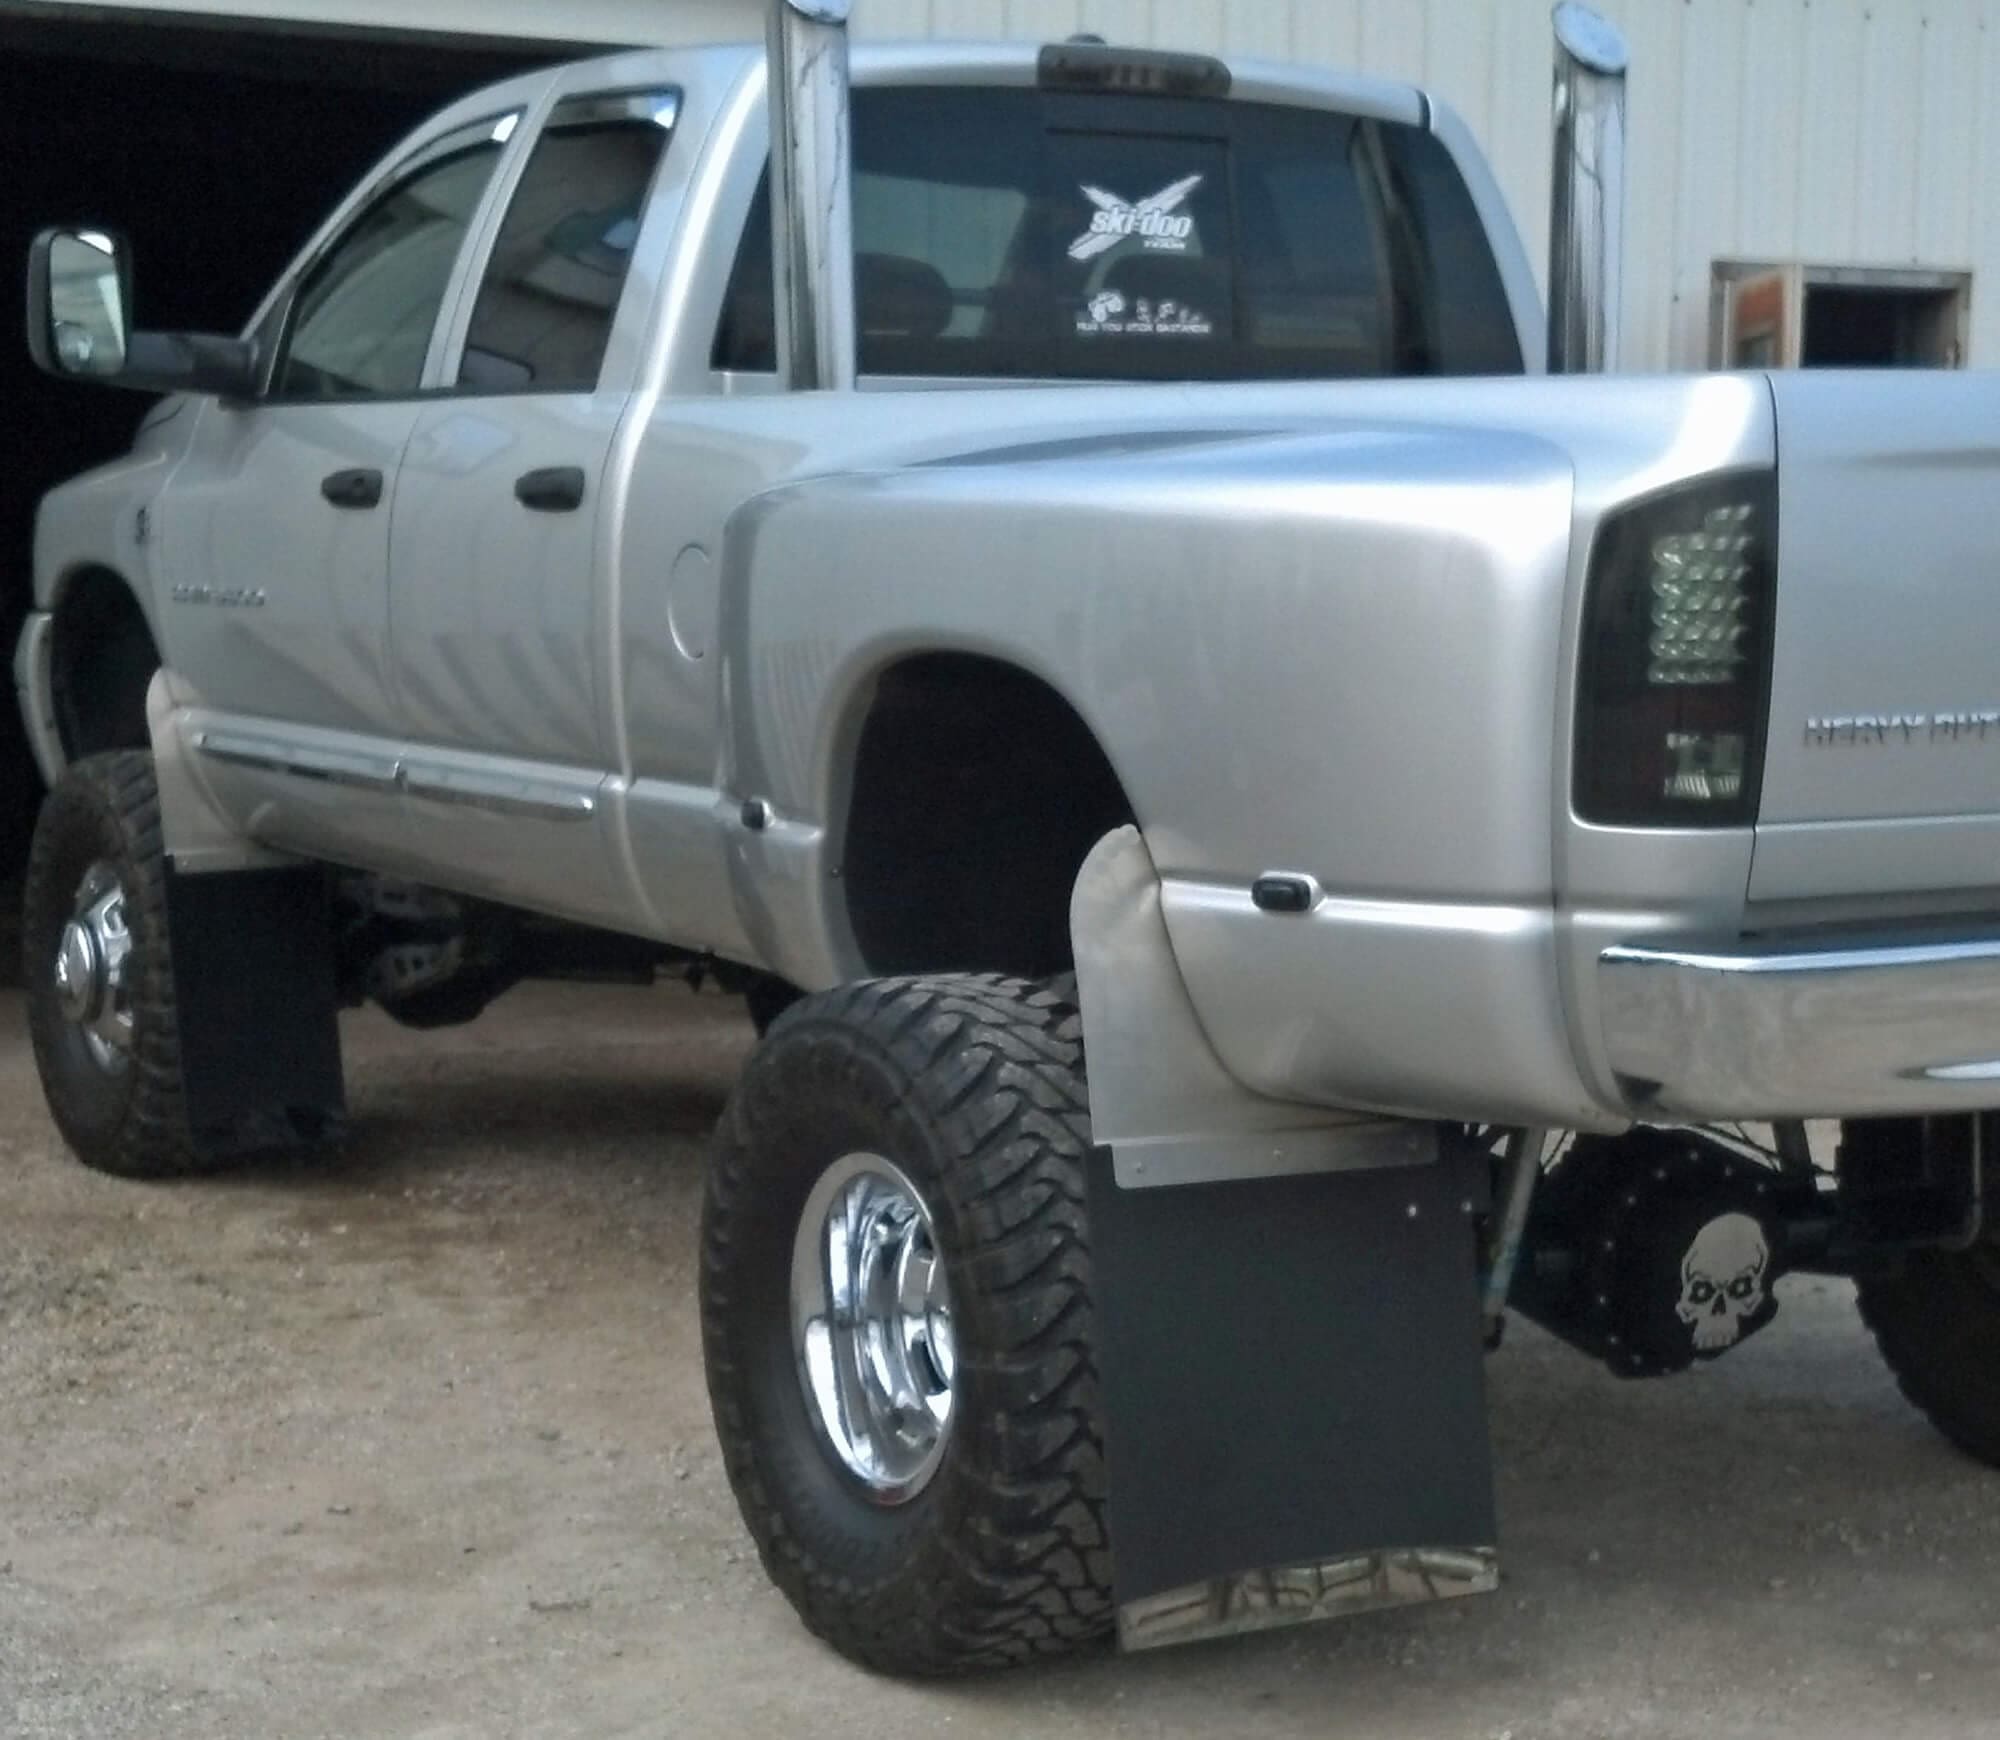 Mud Flaps For Lifted Dually Trucks Park Art - vrogue.co